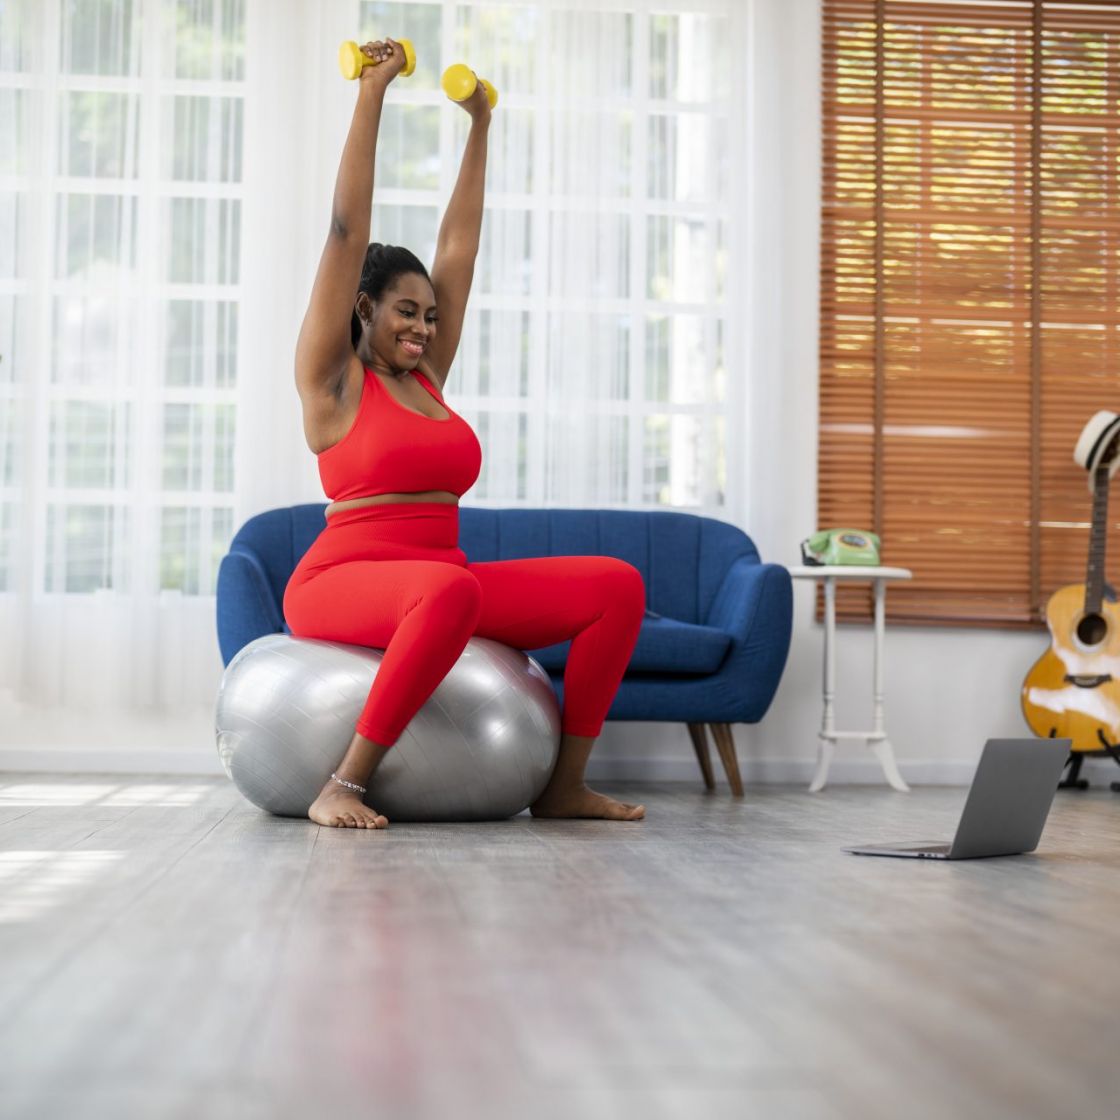 Is pilates a form of strength training and can I do it instead?